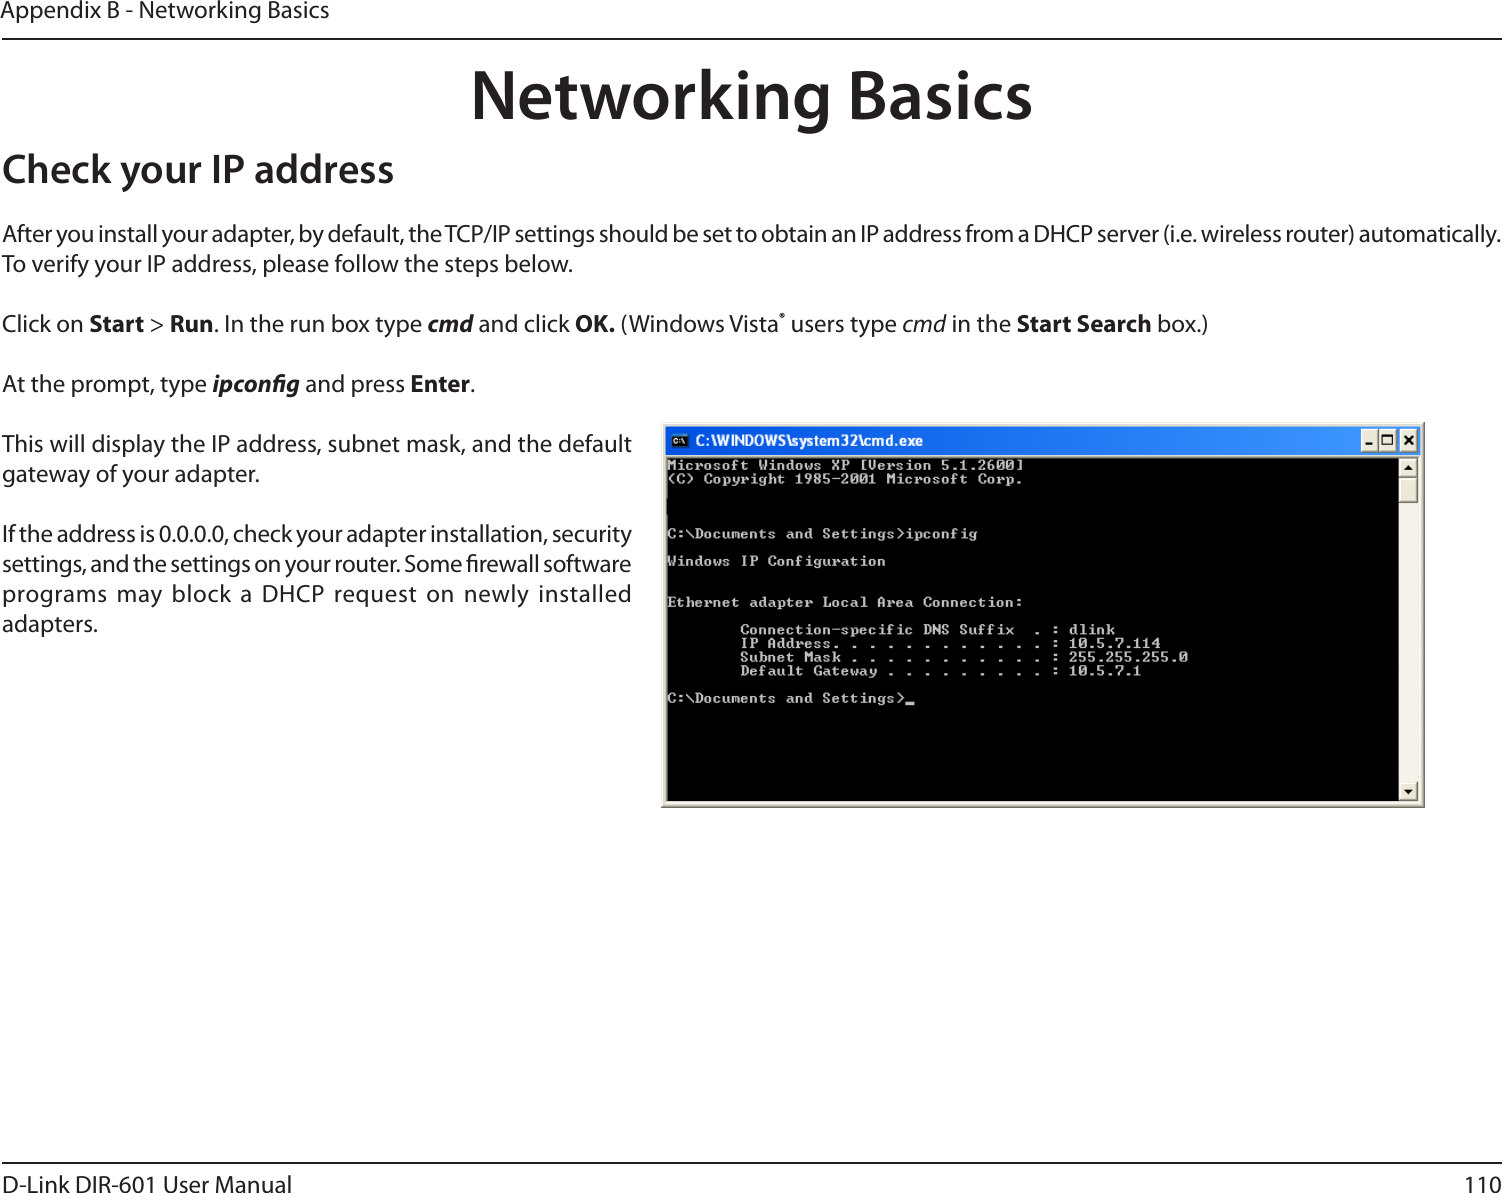 110D-Link DIR-601 User ManualAppendix B - Networking BasicsNetworking BasicsCheck your IP addressAfter you install your adapter, by default, the TCP/IP settings should be set to obtain an IP address from a DHCP server (i.e. wireless router) automatically. To verify your IP address, please follow the steps below.Click on Start &gt; Run. In the run box type cmd and click OK. (Windows Vista® users type cmd in the StartSearch box.)At the prompt, type ipcong and press Enter.This will display the IP address, subnet mask, and the default gateway of your adapter.If the address is 0.0.0.0, check your adapter installation, security settings, and the settings on your router. Some rewall software programs may block a  DHCP request on newly installed adapters. 